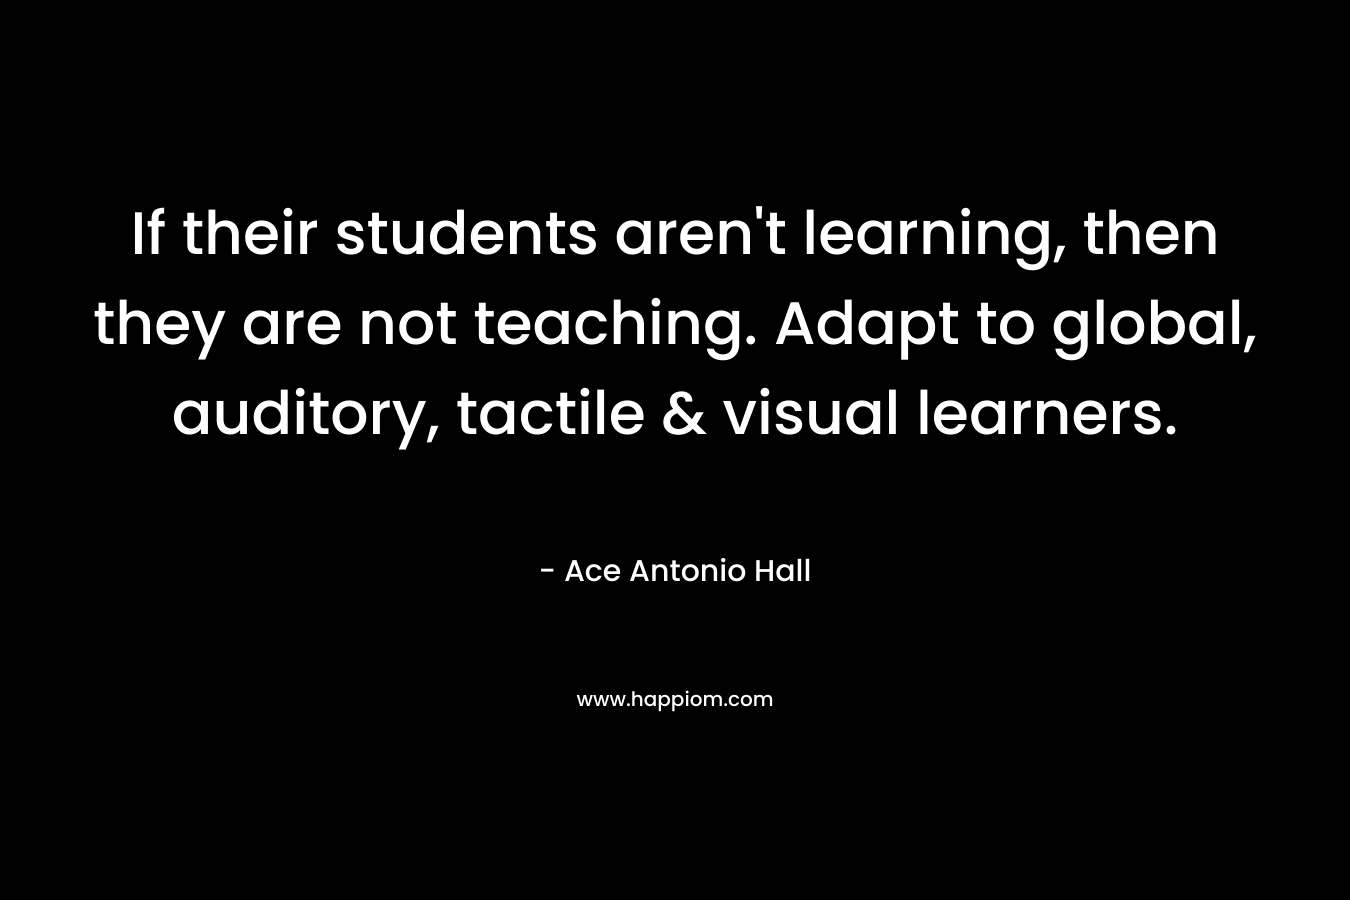 If their students aren’t learning, then they are not teaching. Adapt to global, auditory, tactile & visual learners. – Ace Antonio Hall